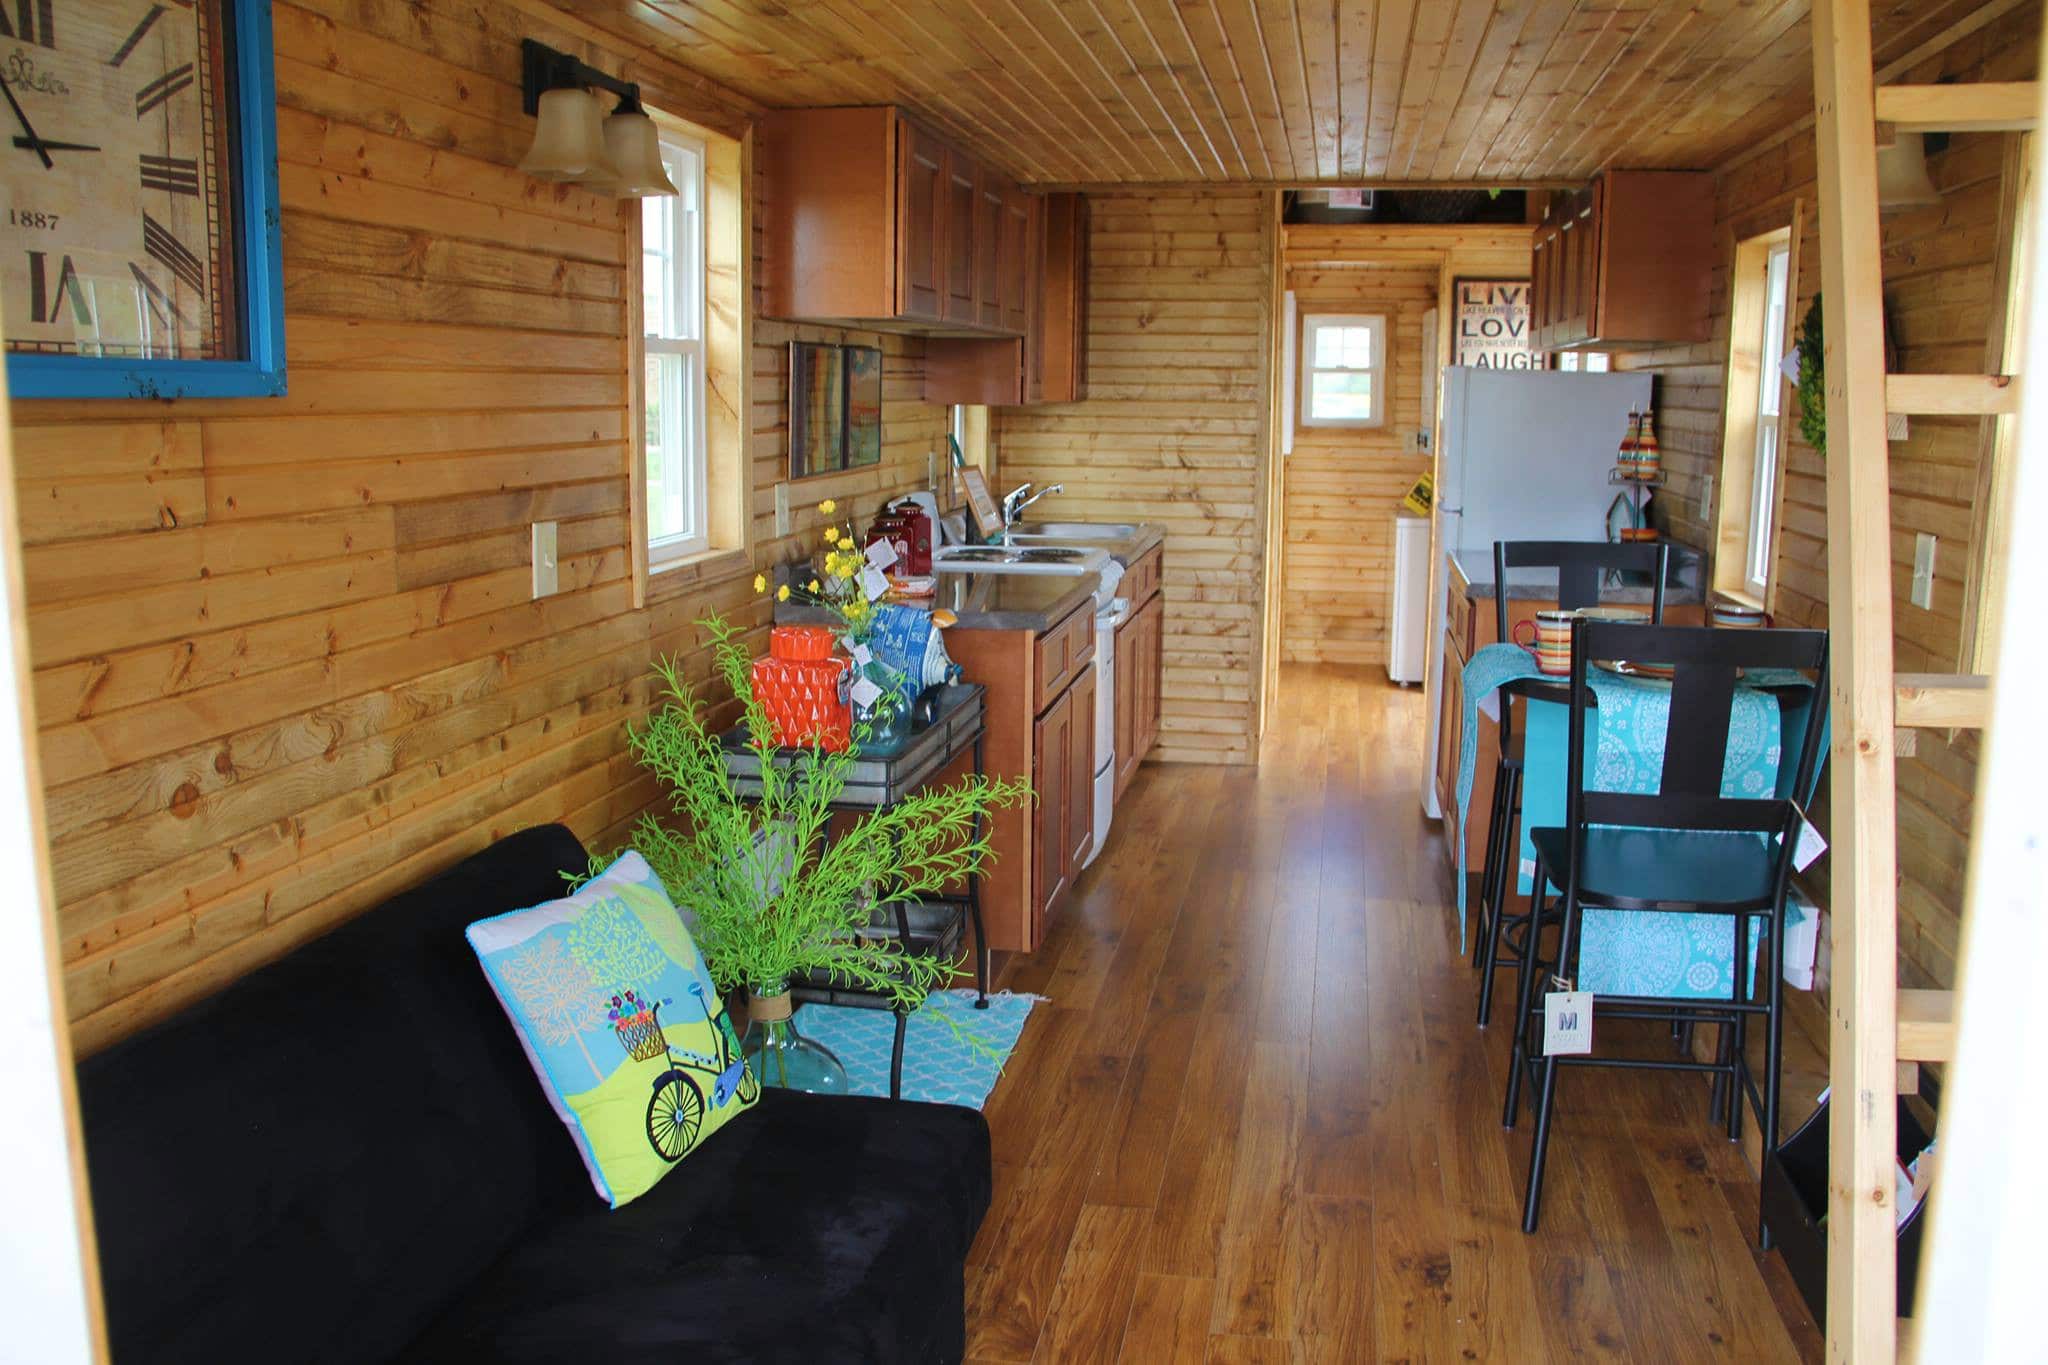 Frontier Community College Construction Technology Program Builds Tiny House in Southern Illinois